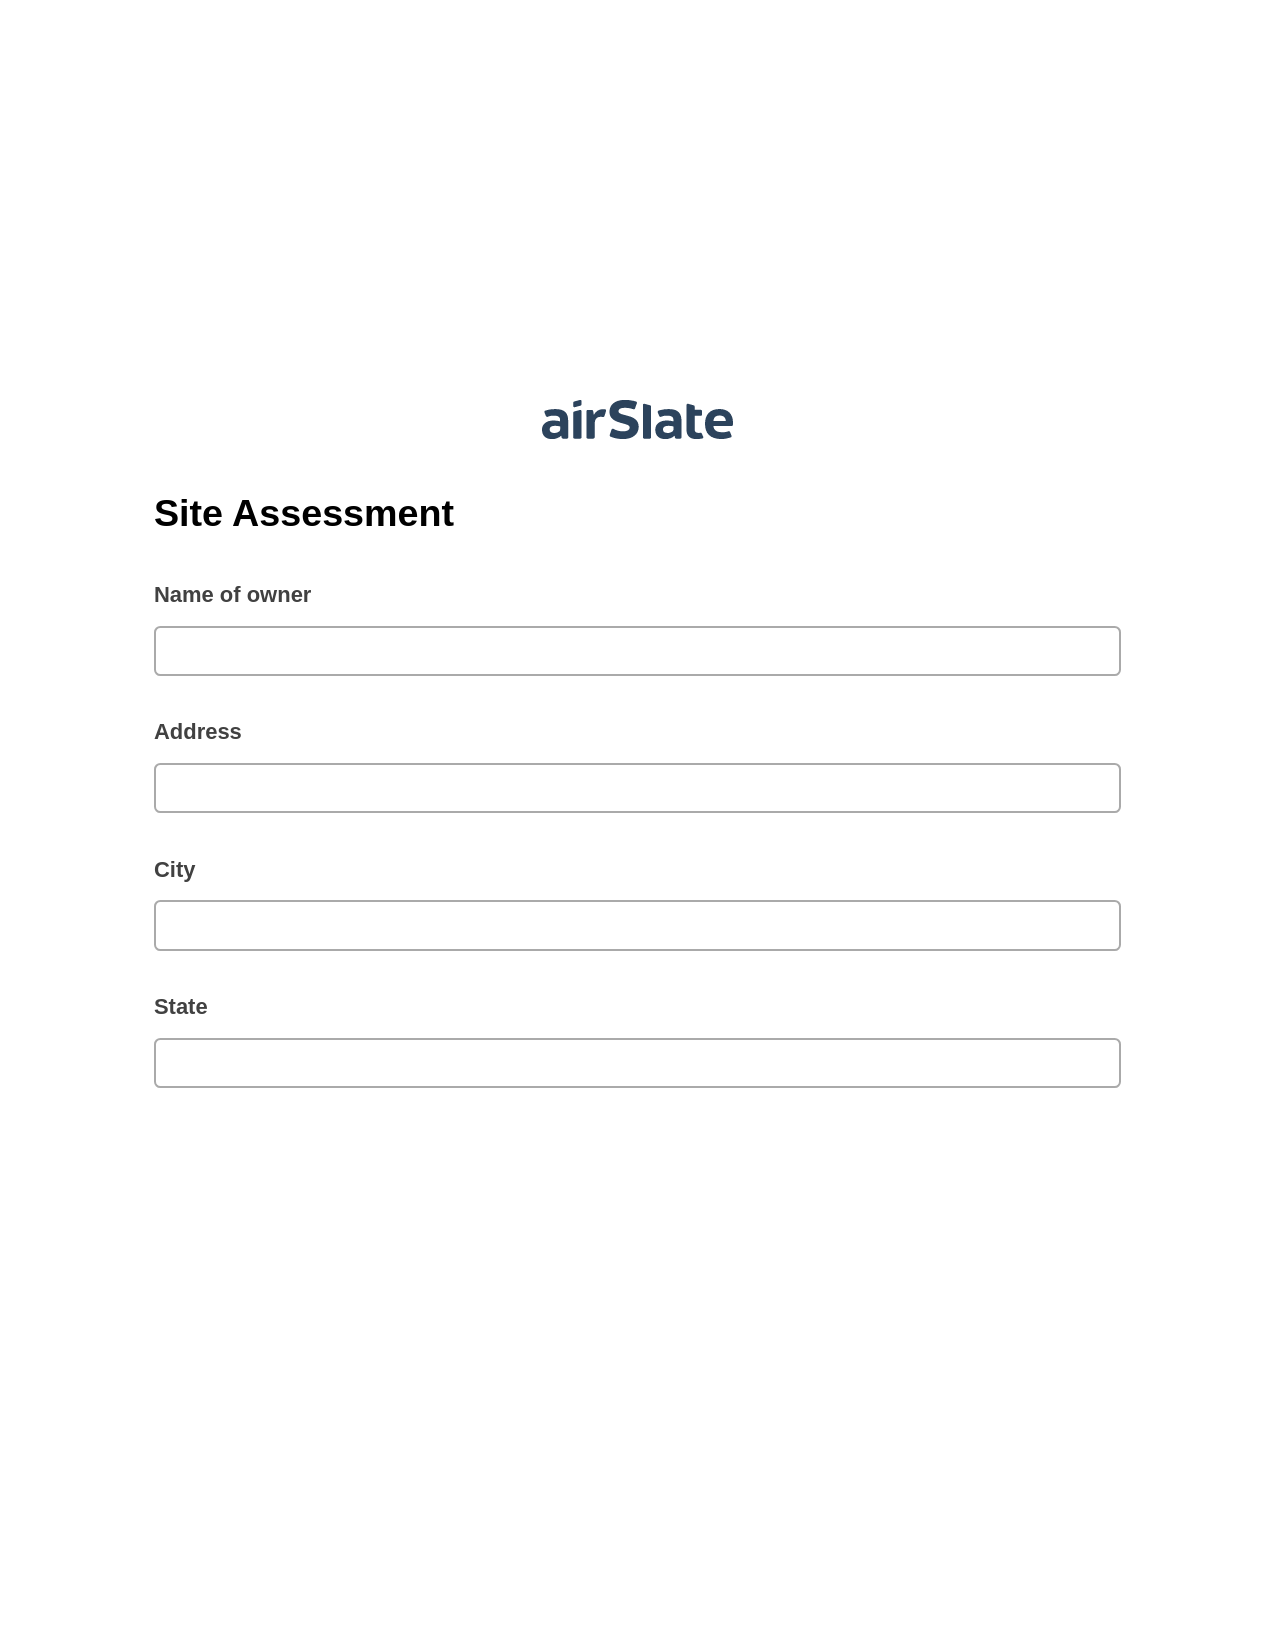 Site Assessment Pre-fill from Litmos bot, Pre-fill with Custom Data Bot, Export to Excel 365 Bot